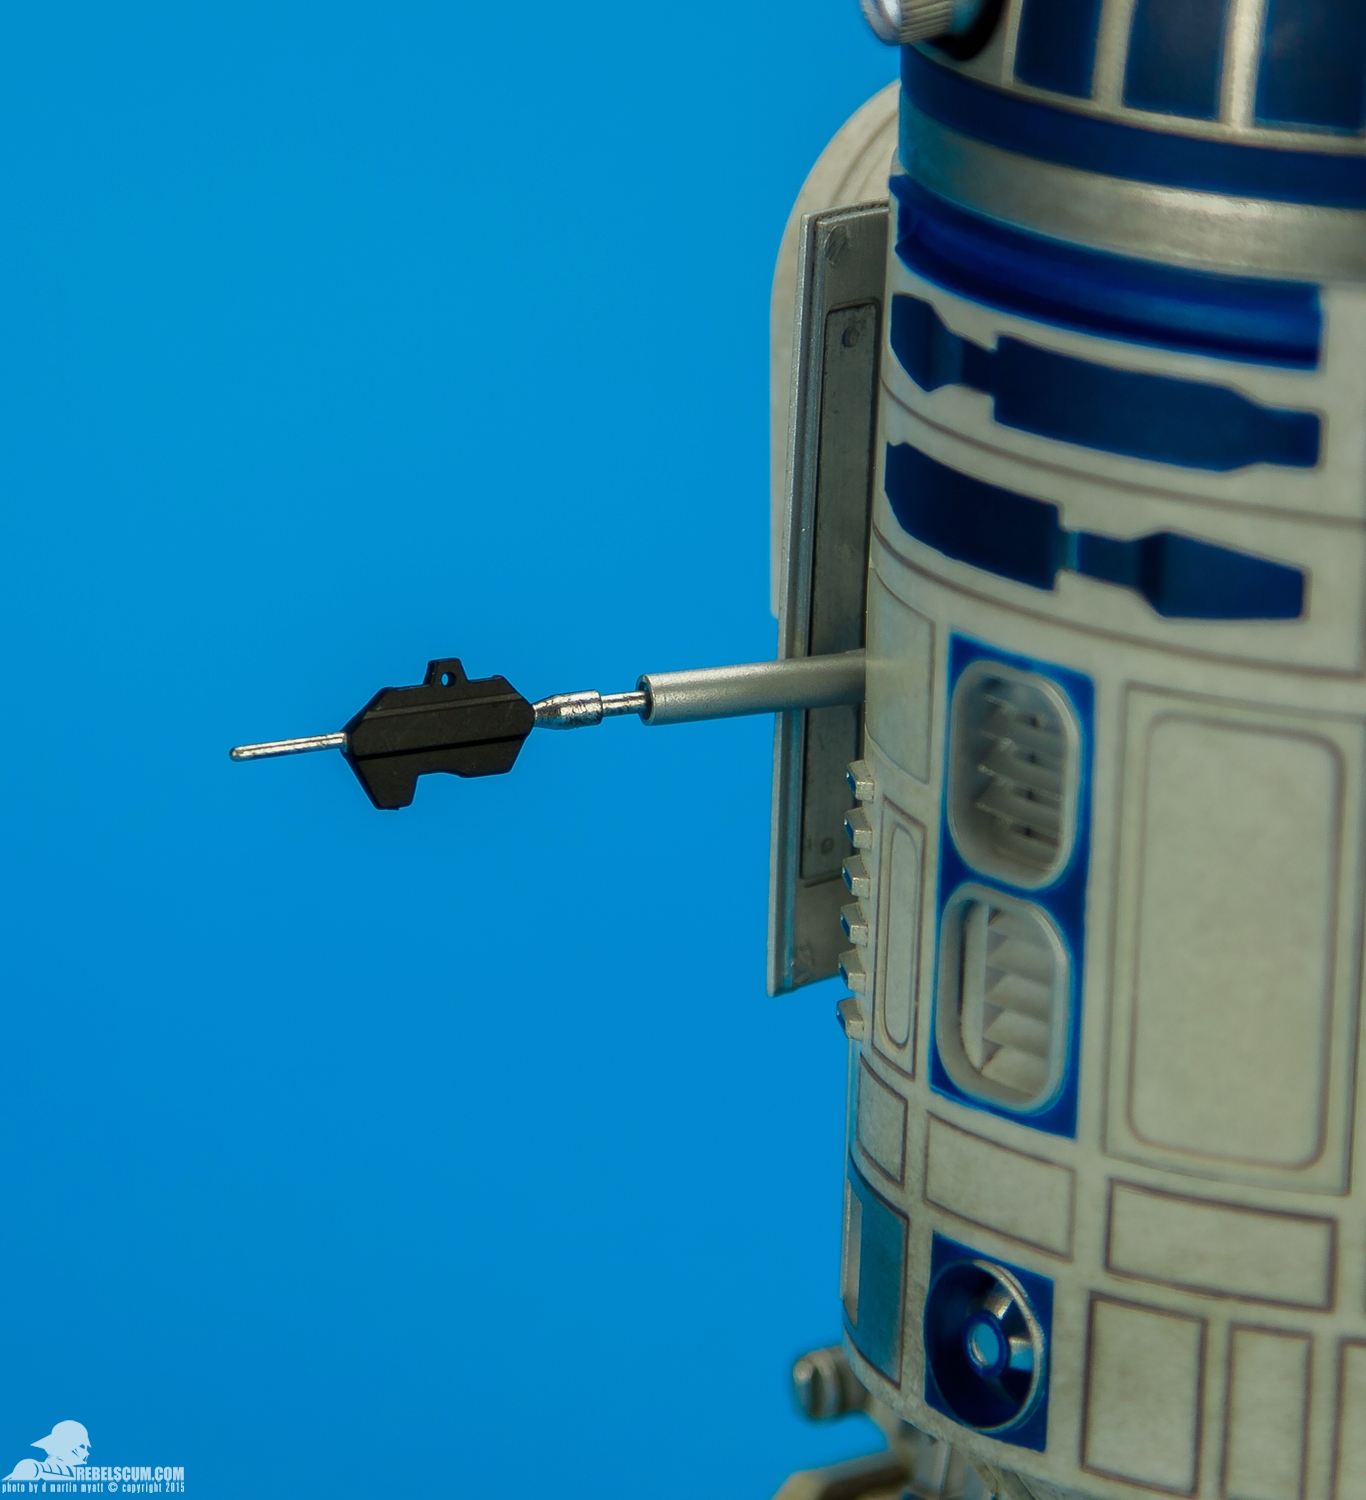 Sideshow-Collectibles-R2-D2-Sixth-Scale-Figure-Review-039.jpg